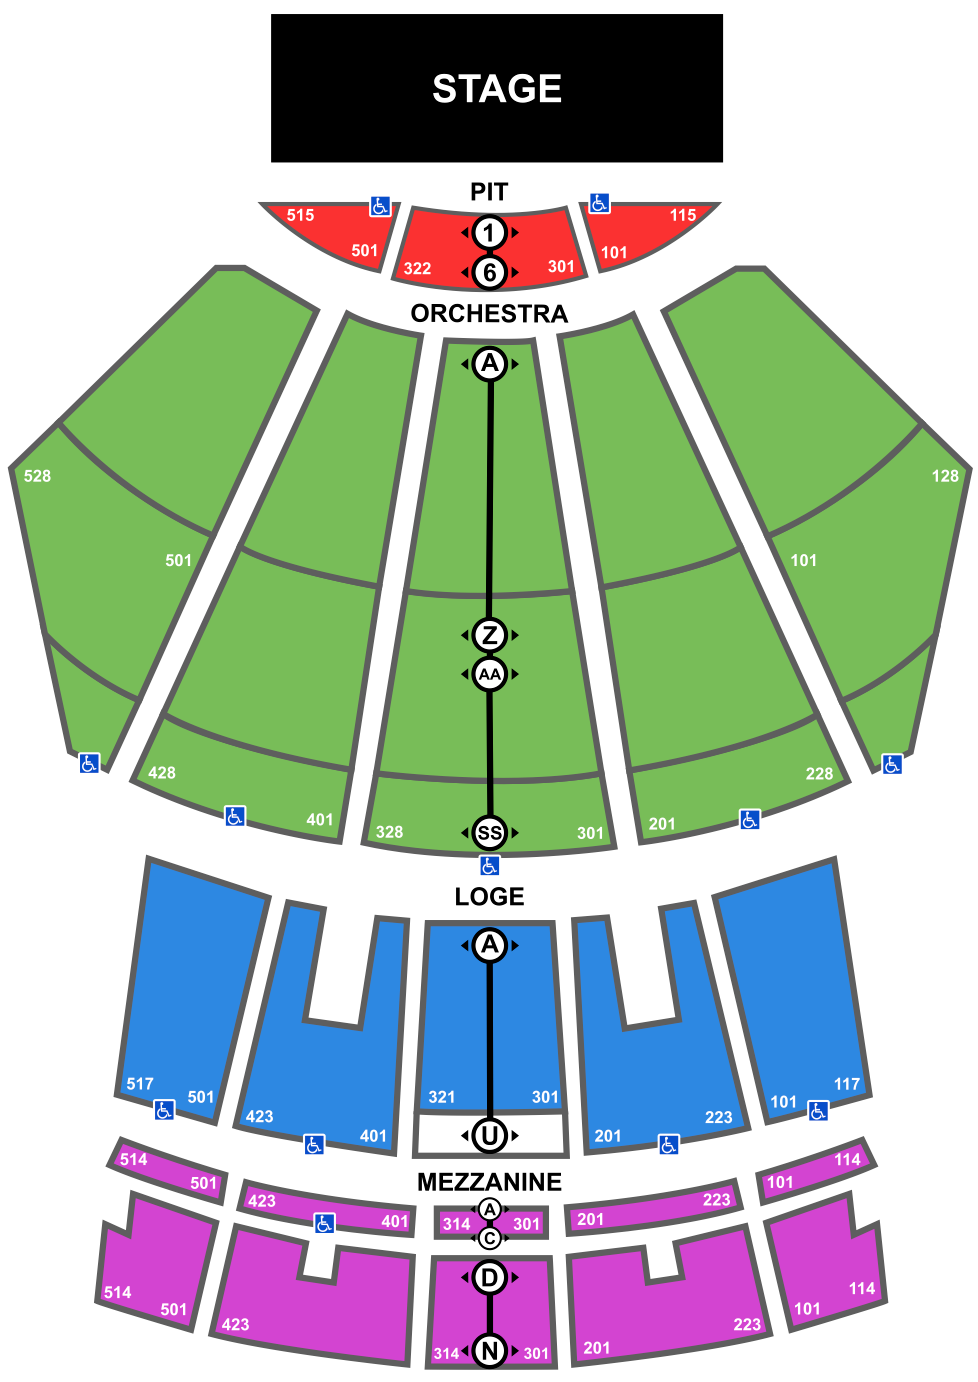 Peacock Theater Seating Chart. Stage, Pit, Orchestra, Loge, Mezzanine. Full Description Below